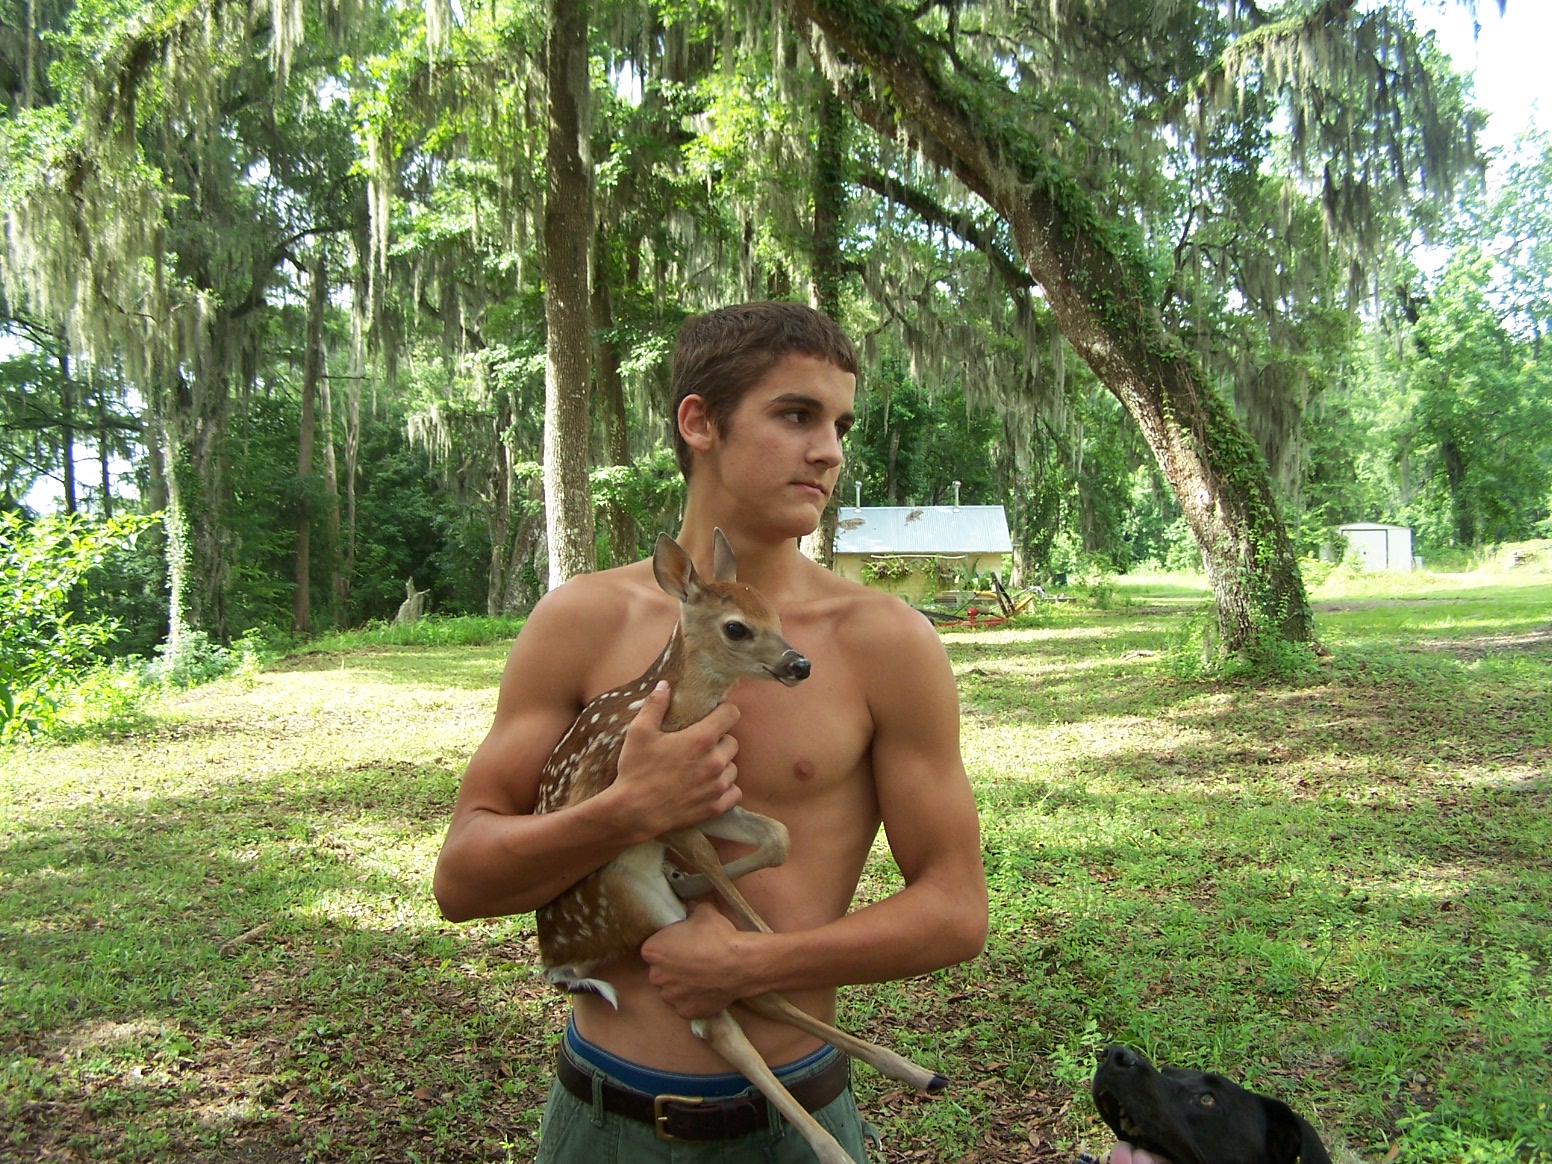 Ethan and the baby deer